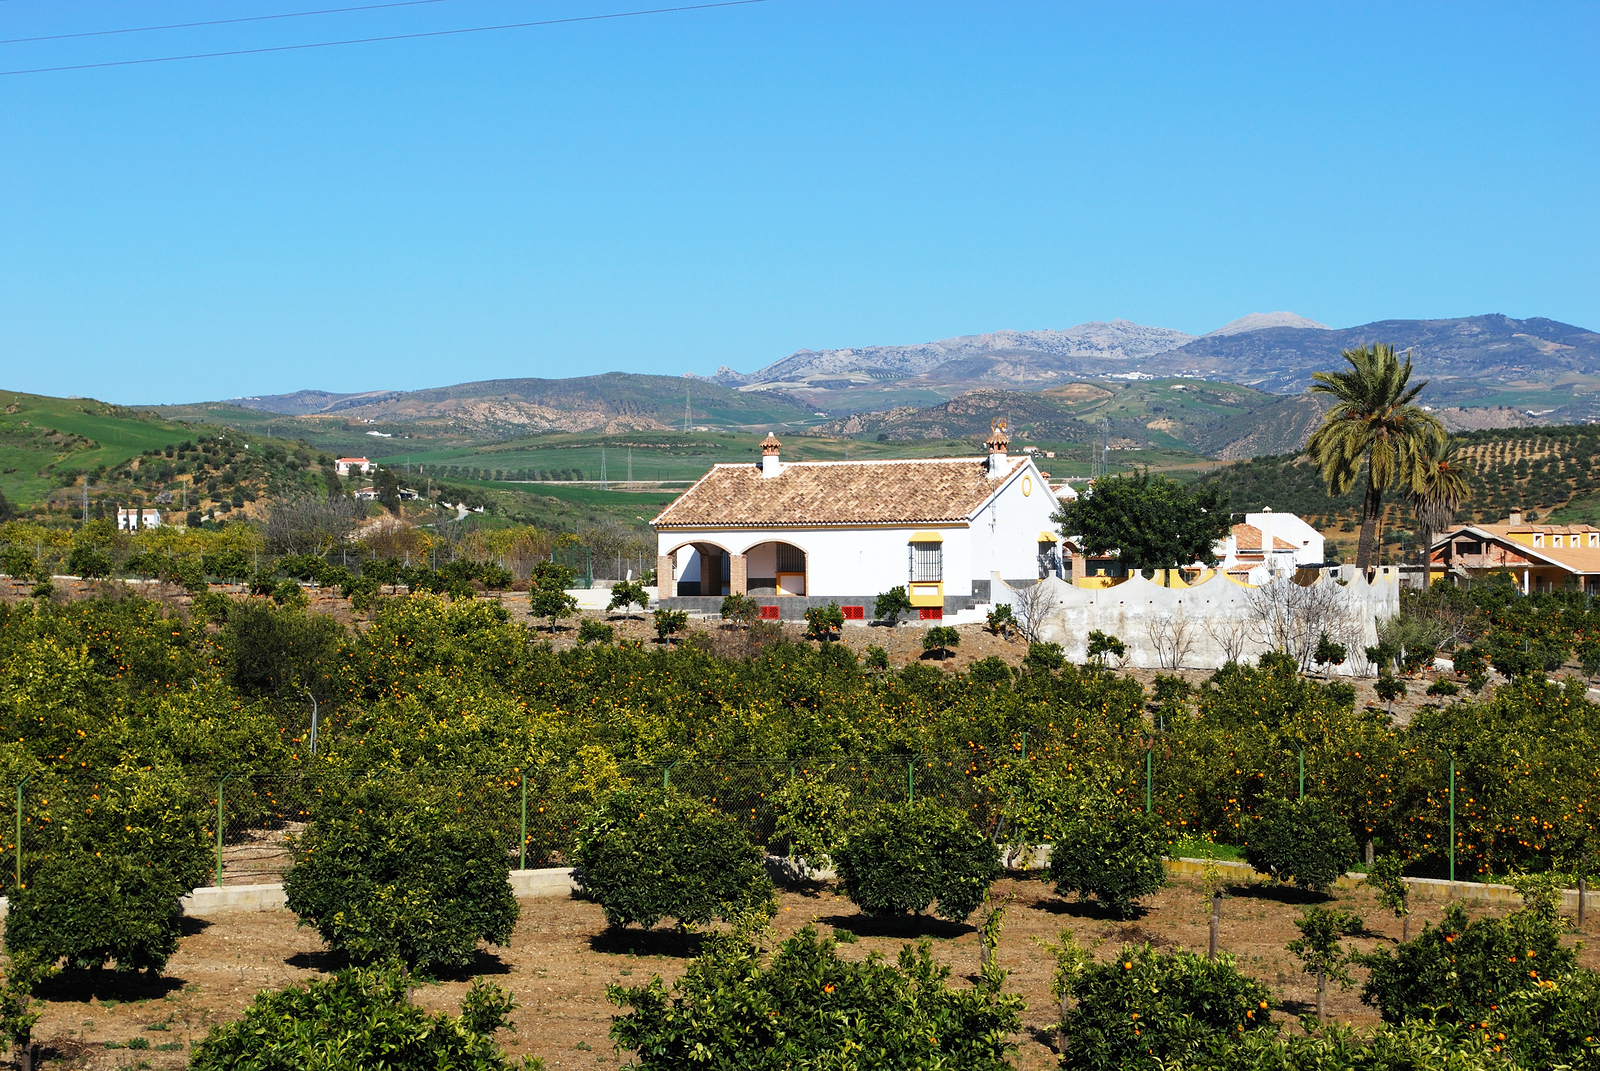 Pizarra property and living Orange grove and farm, Andalusia, Spain.